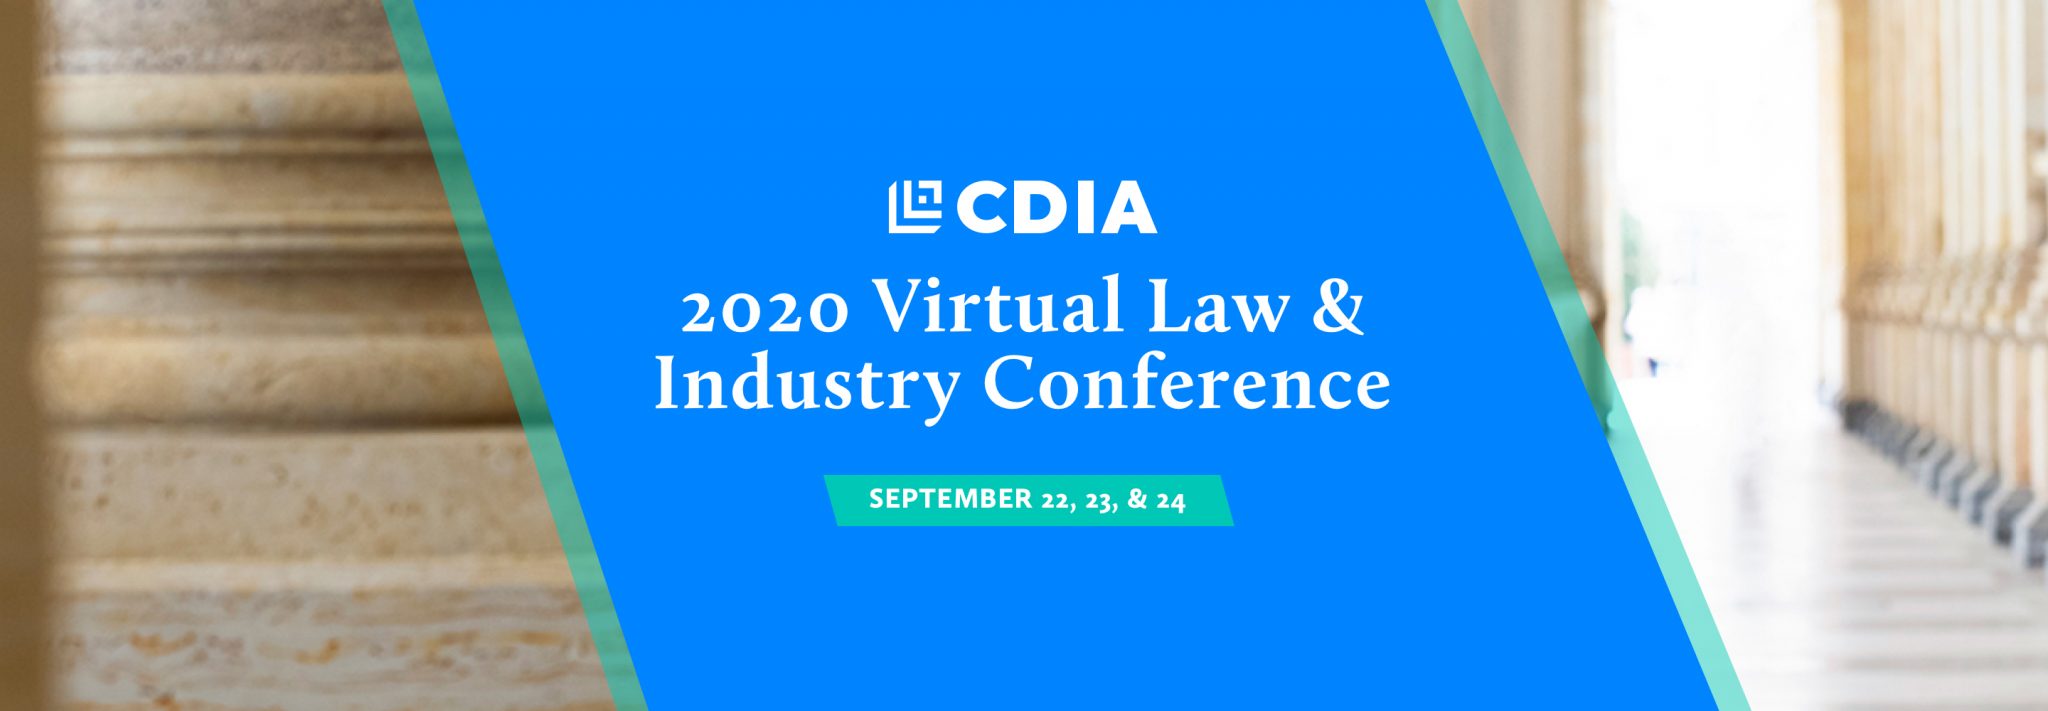 CDIA Law Conference Registration CDIA